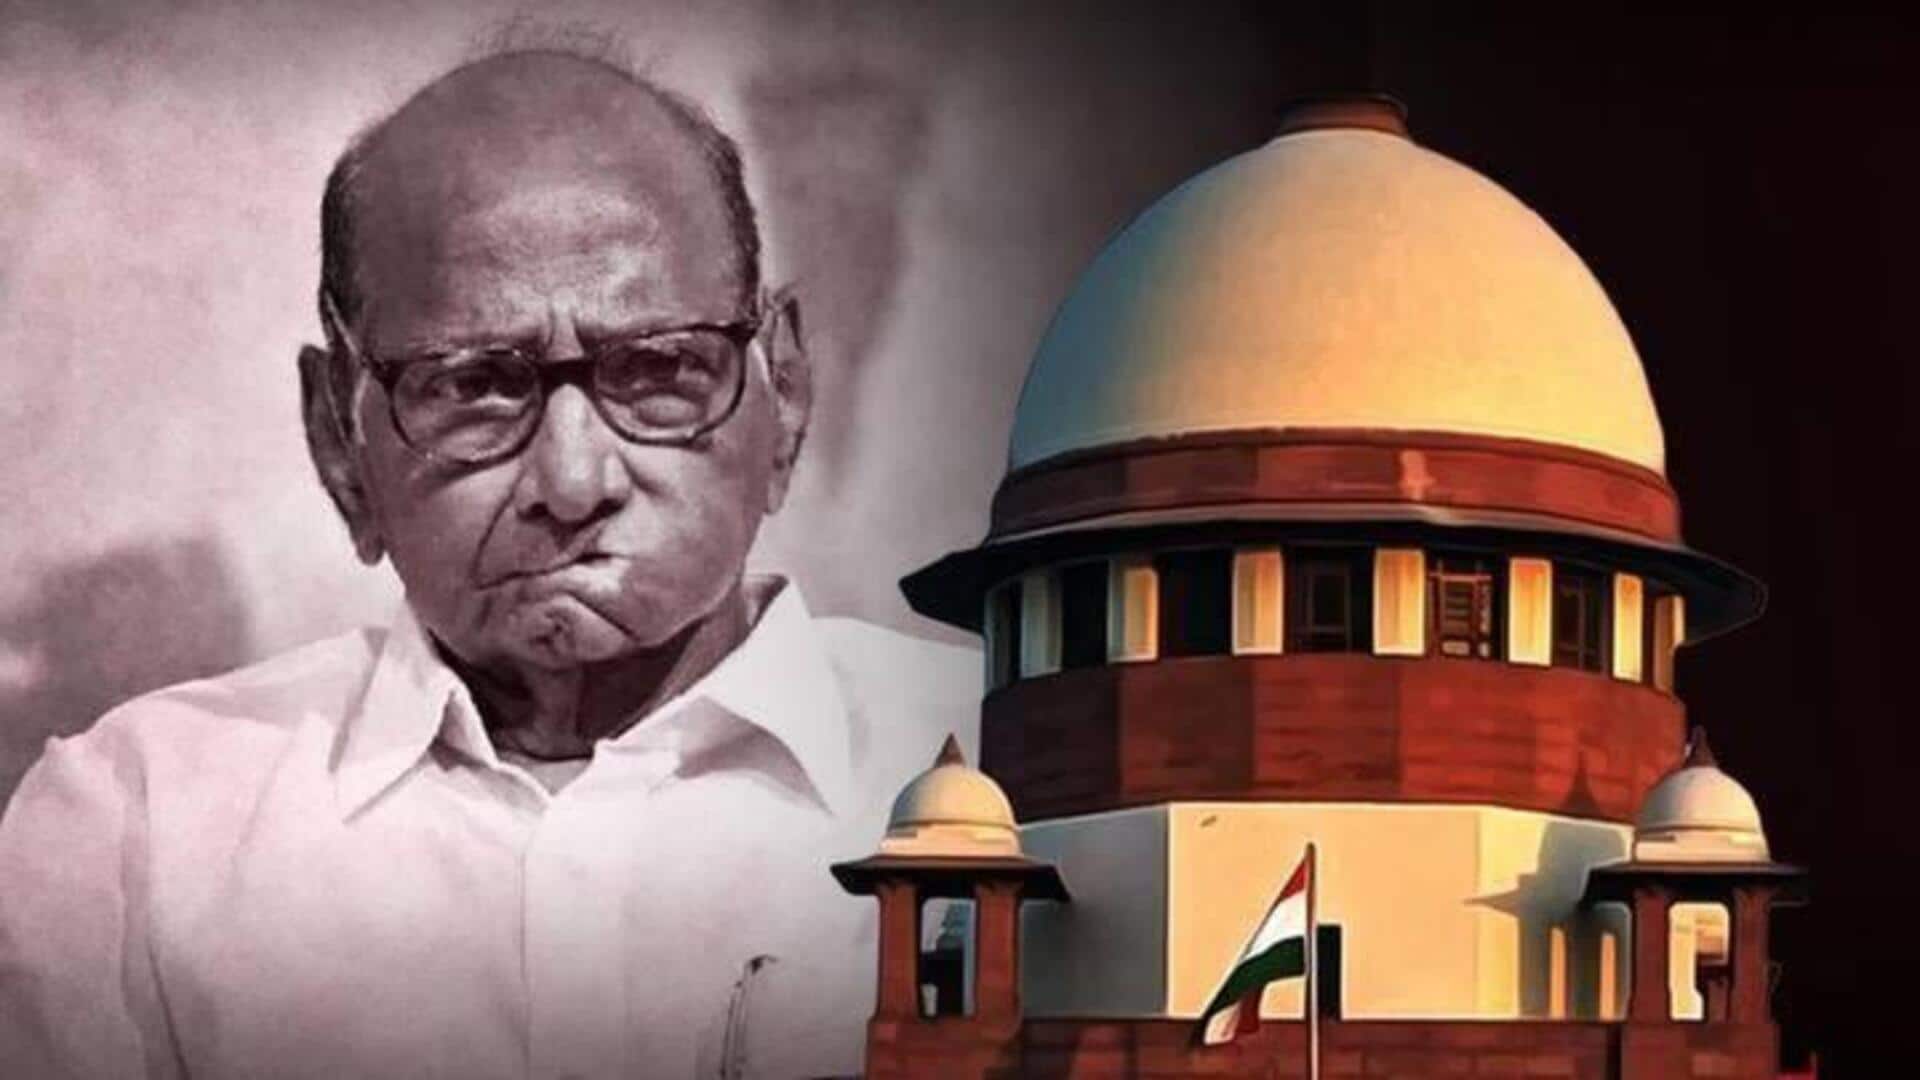 SC greenlights Sharad faction's party name, symbol for elections